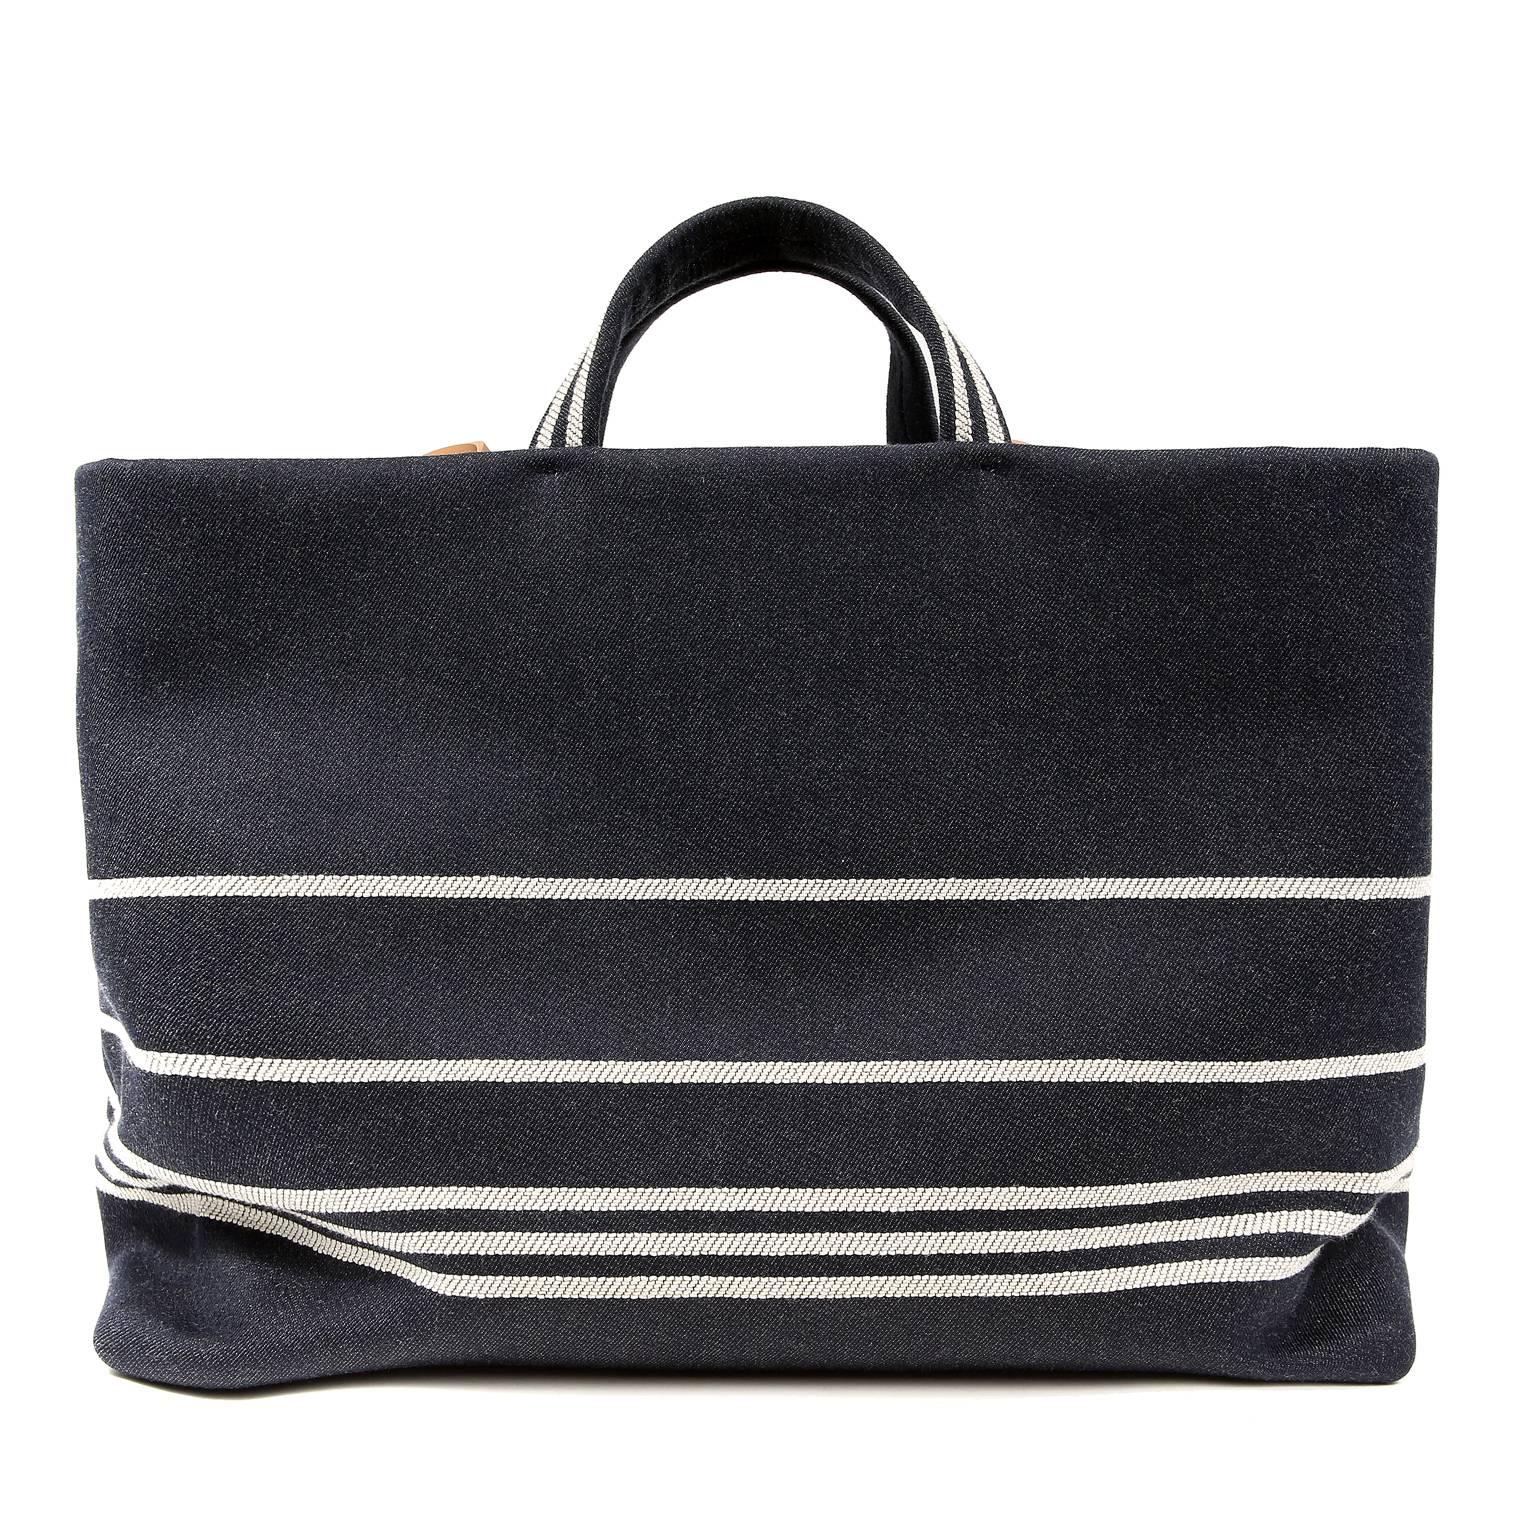 Chanel Black Classic Summer Tote- PRISTINE
 Perfect for the beach or a stroll through town, it is certain to become a holiday favorite. 

Sturdy black canvas tote has white striping and interlocking CC logo centered on the front.  Protective footed